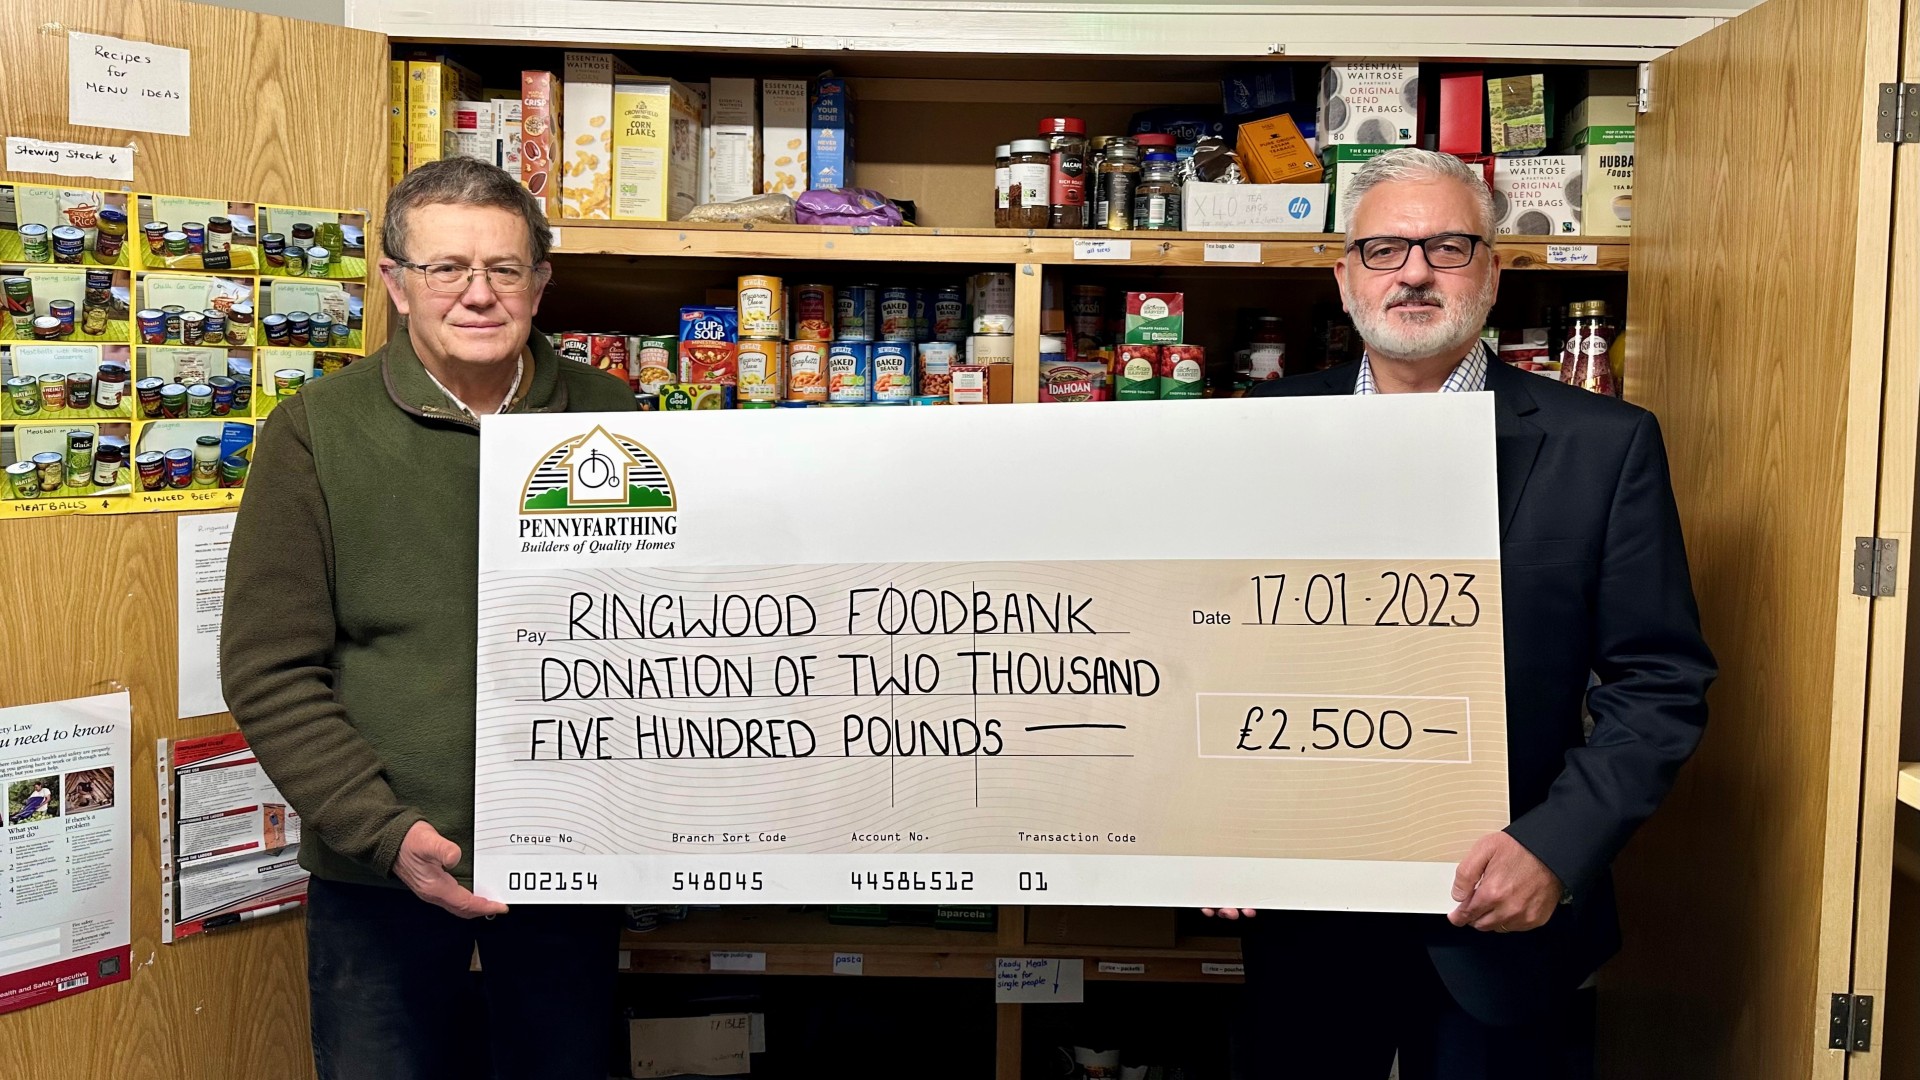 Pennyfarthing Homes support local communities and have donated £2,500 to the Ringwood Food Bank!